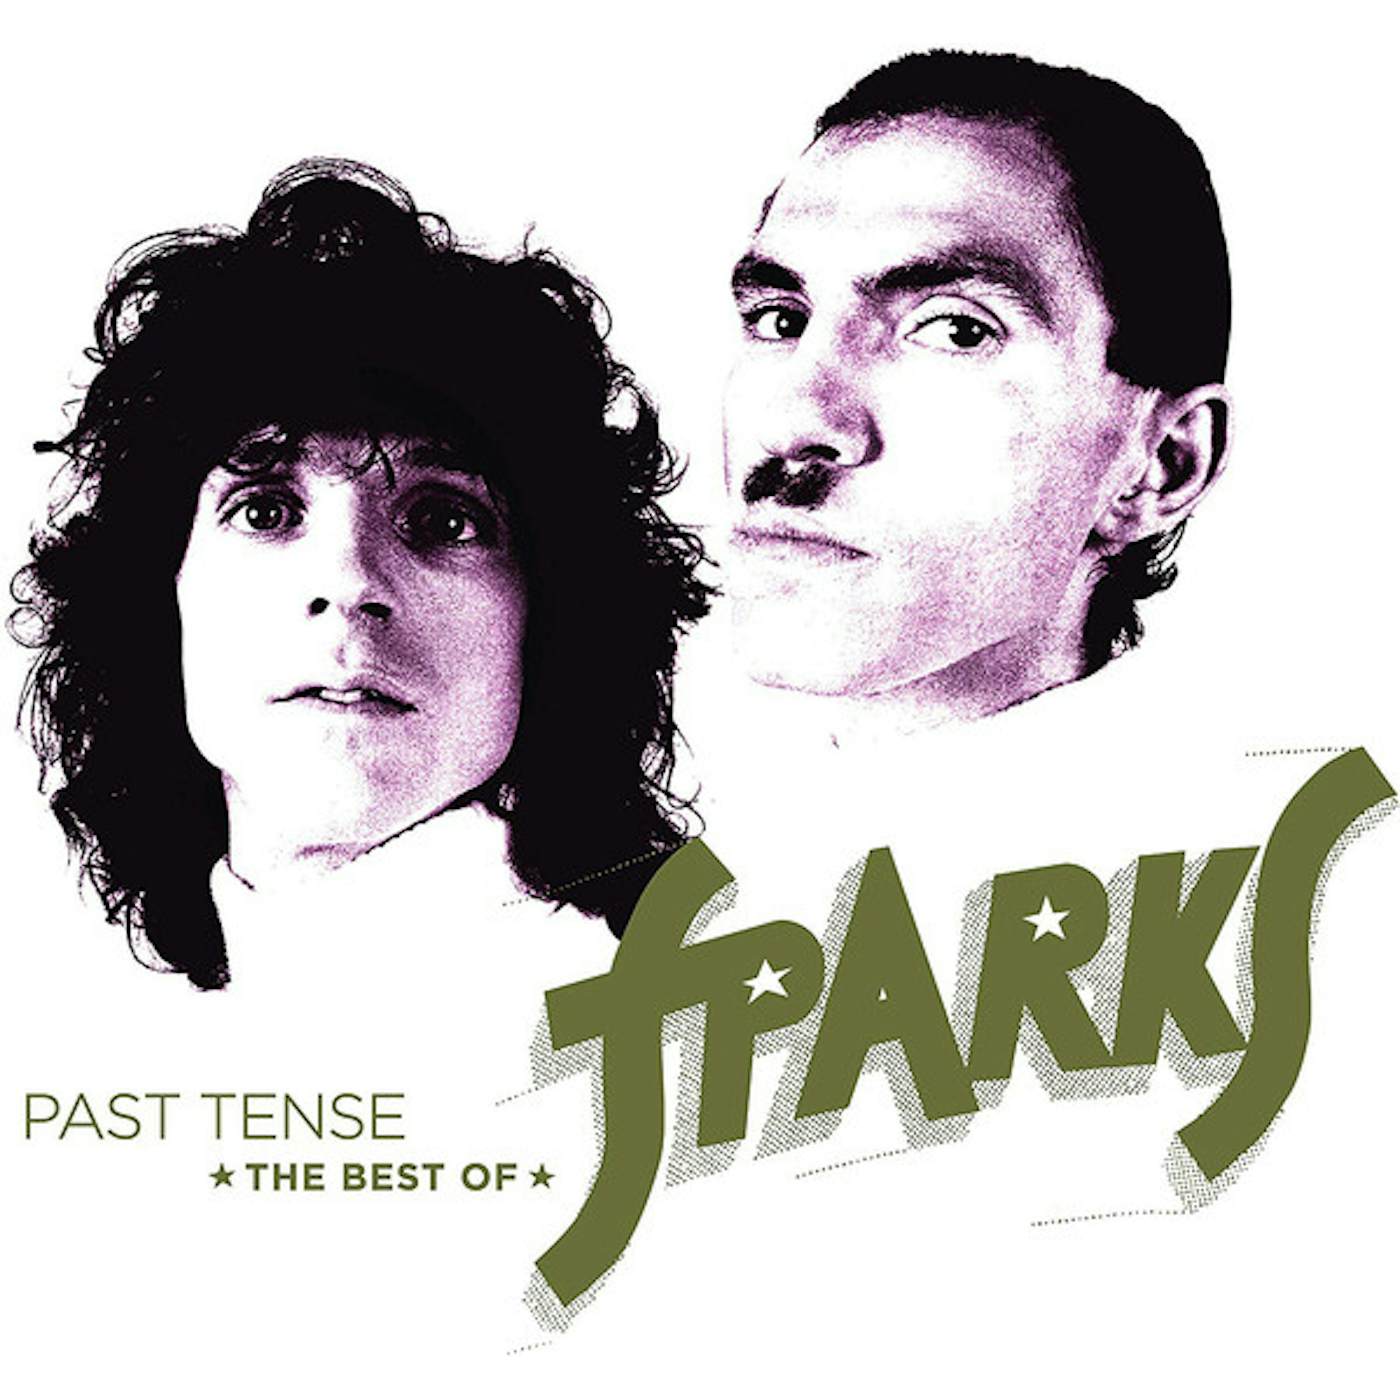 PAST TENSE - BEST OF SPARKS CD